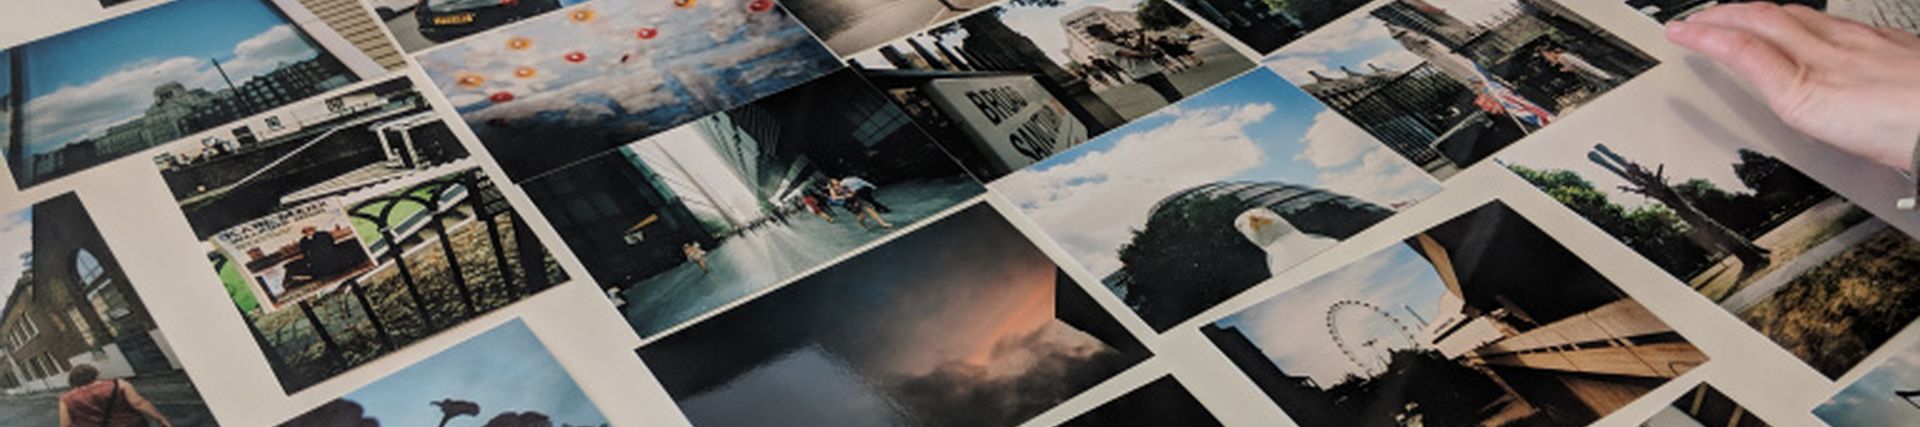 A collage of photographs laid out on a table